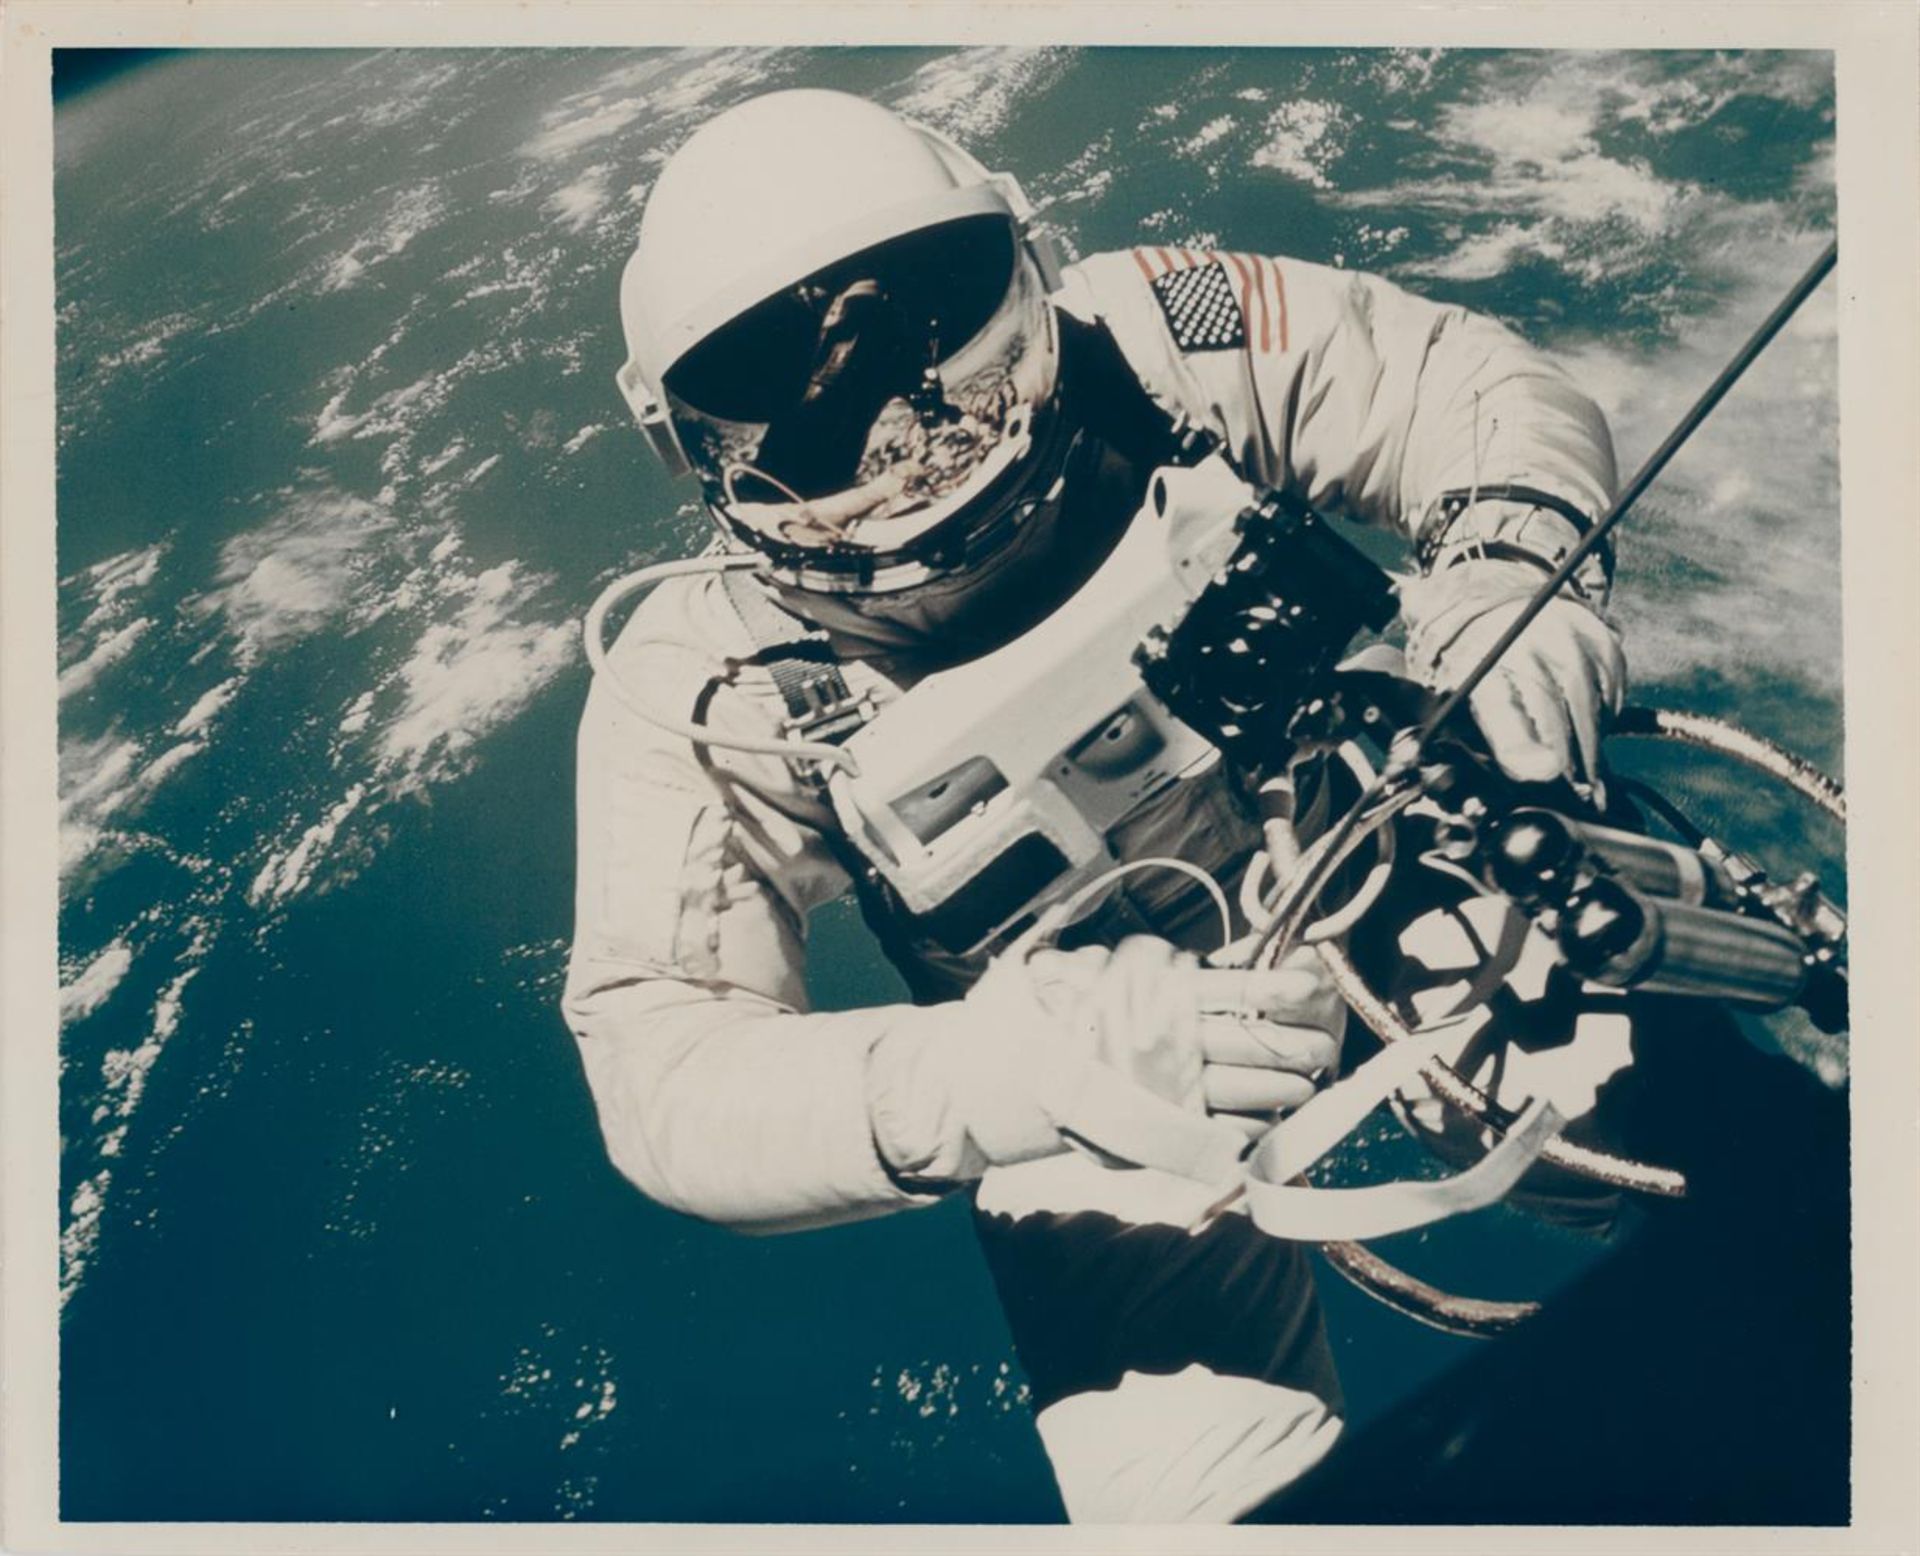 The first view of a human in space, taken during the first U.S. spacewalk, Gemini 4, 3 June 1965